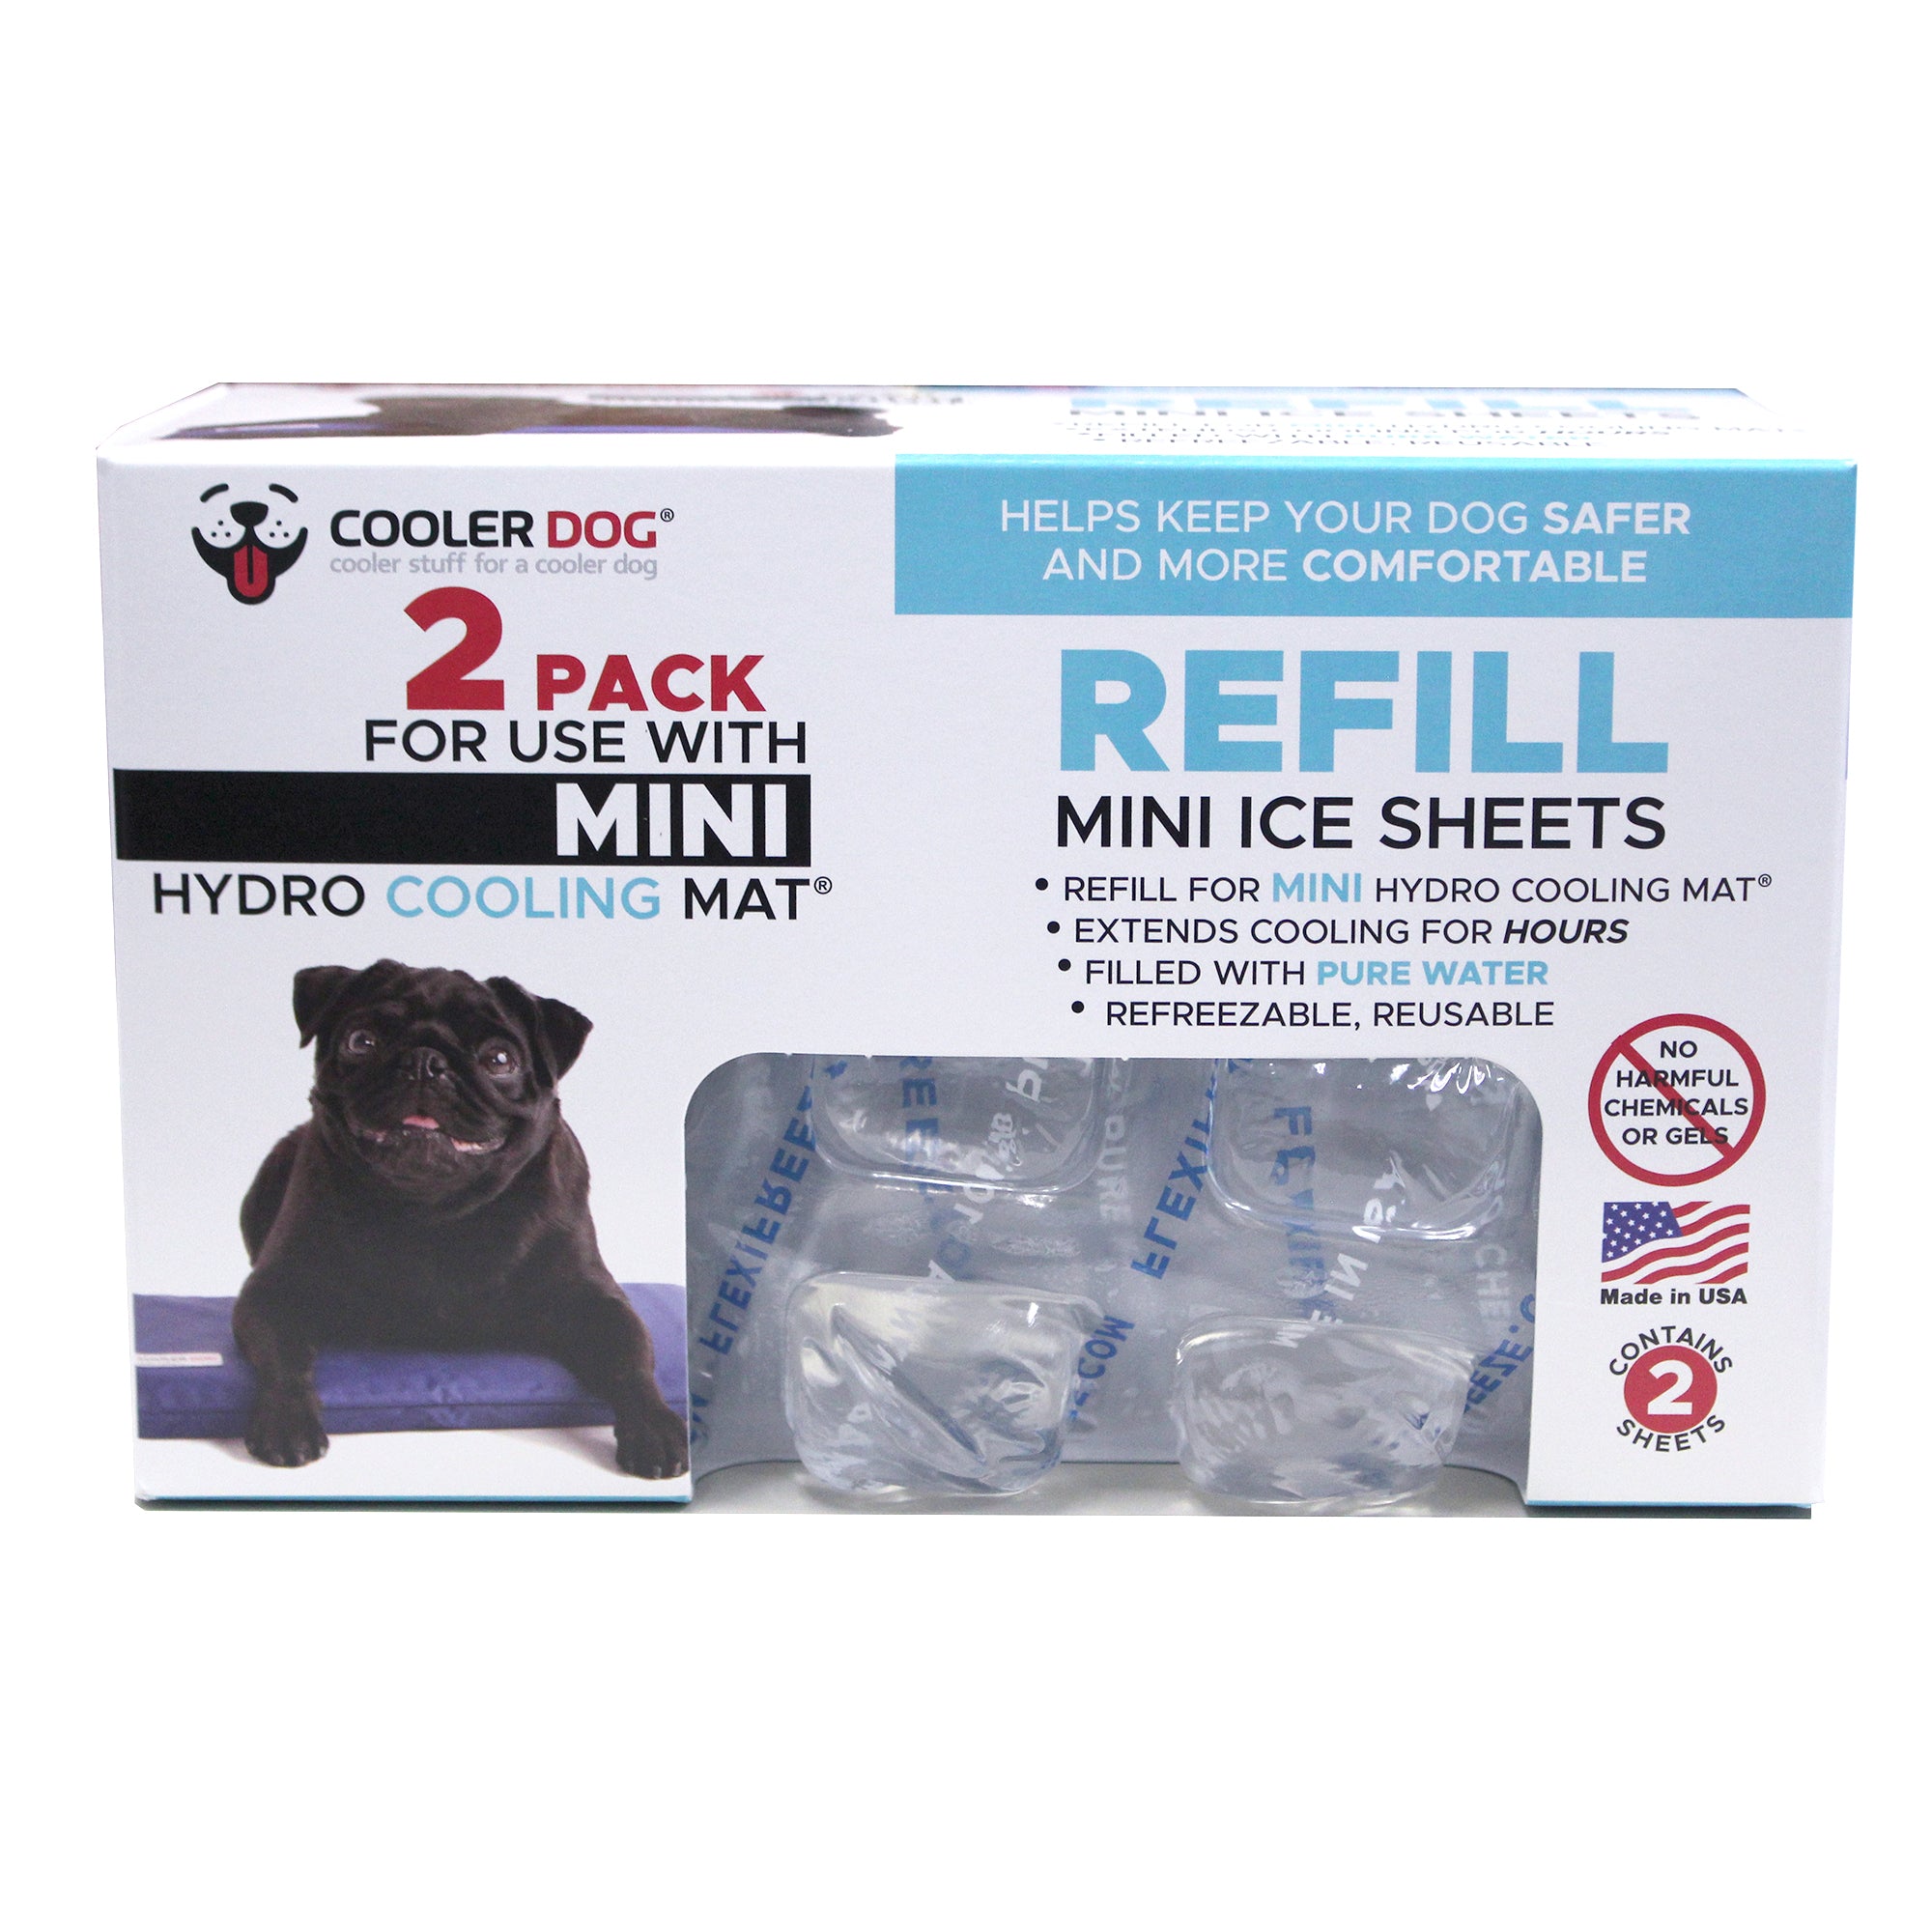 CoolerDog mini hydro cooling mat refill ice sheets fully packaged product 